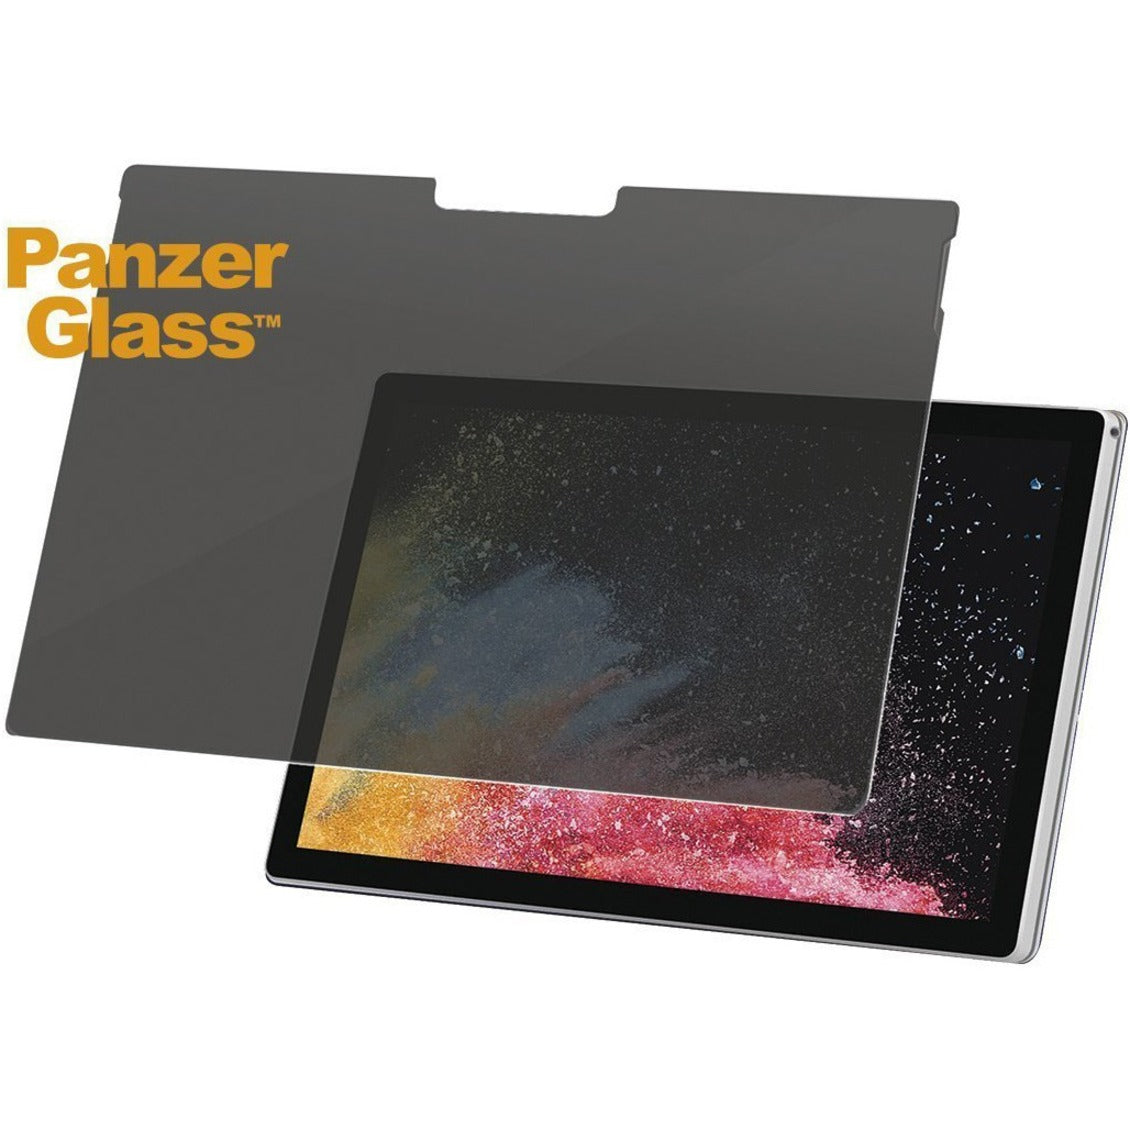 PanzerGlass P6254 Privacy Screen Protector, Edge2Edge, Tempered Glass, 15" LCD Notebook